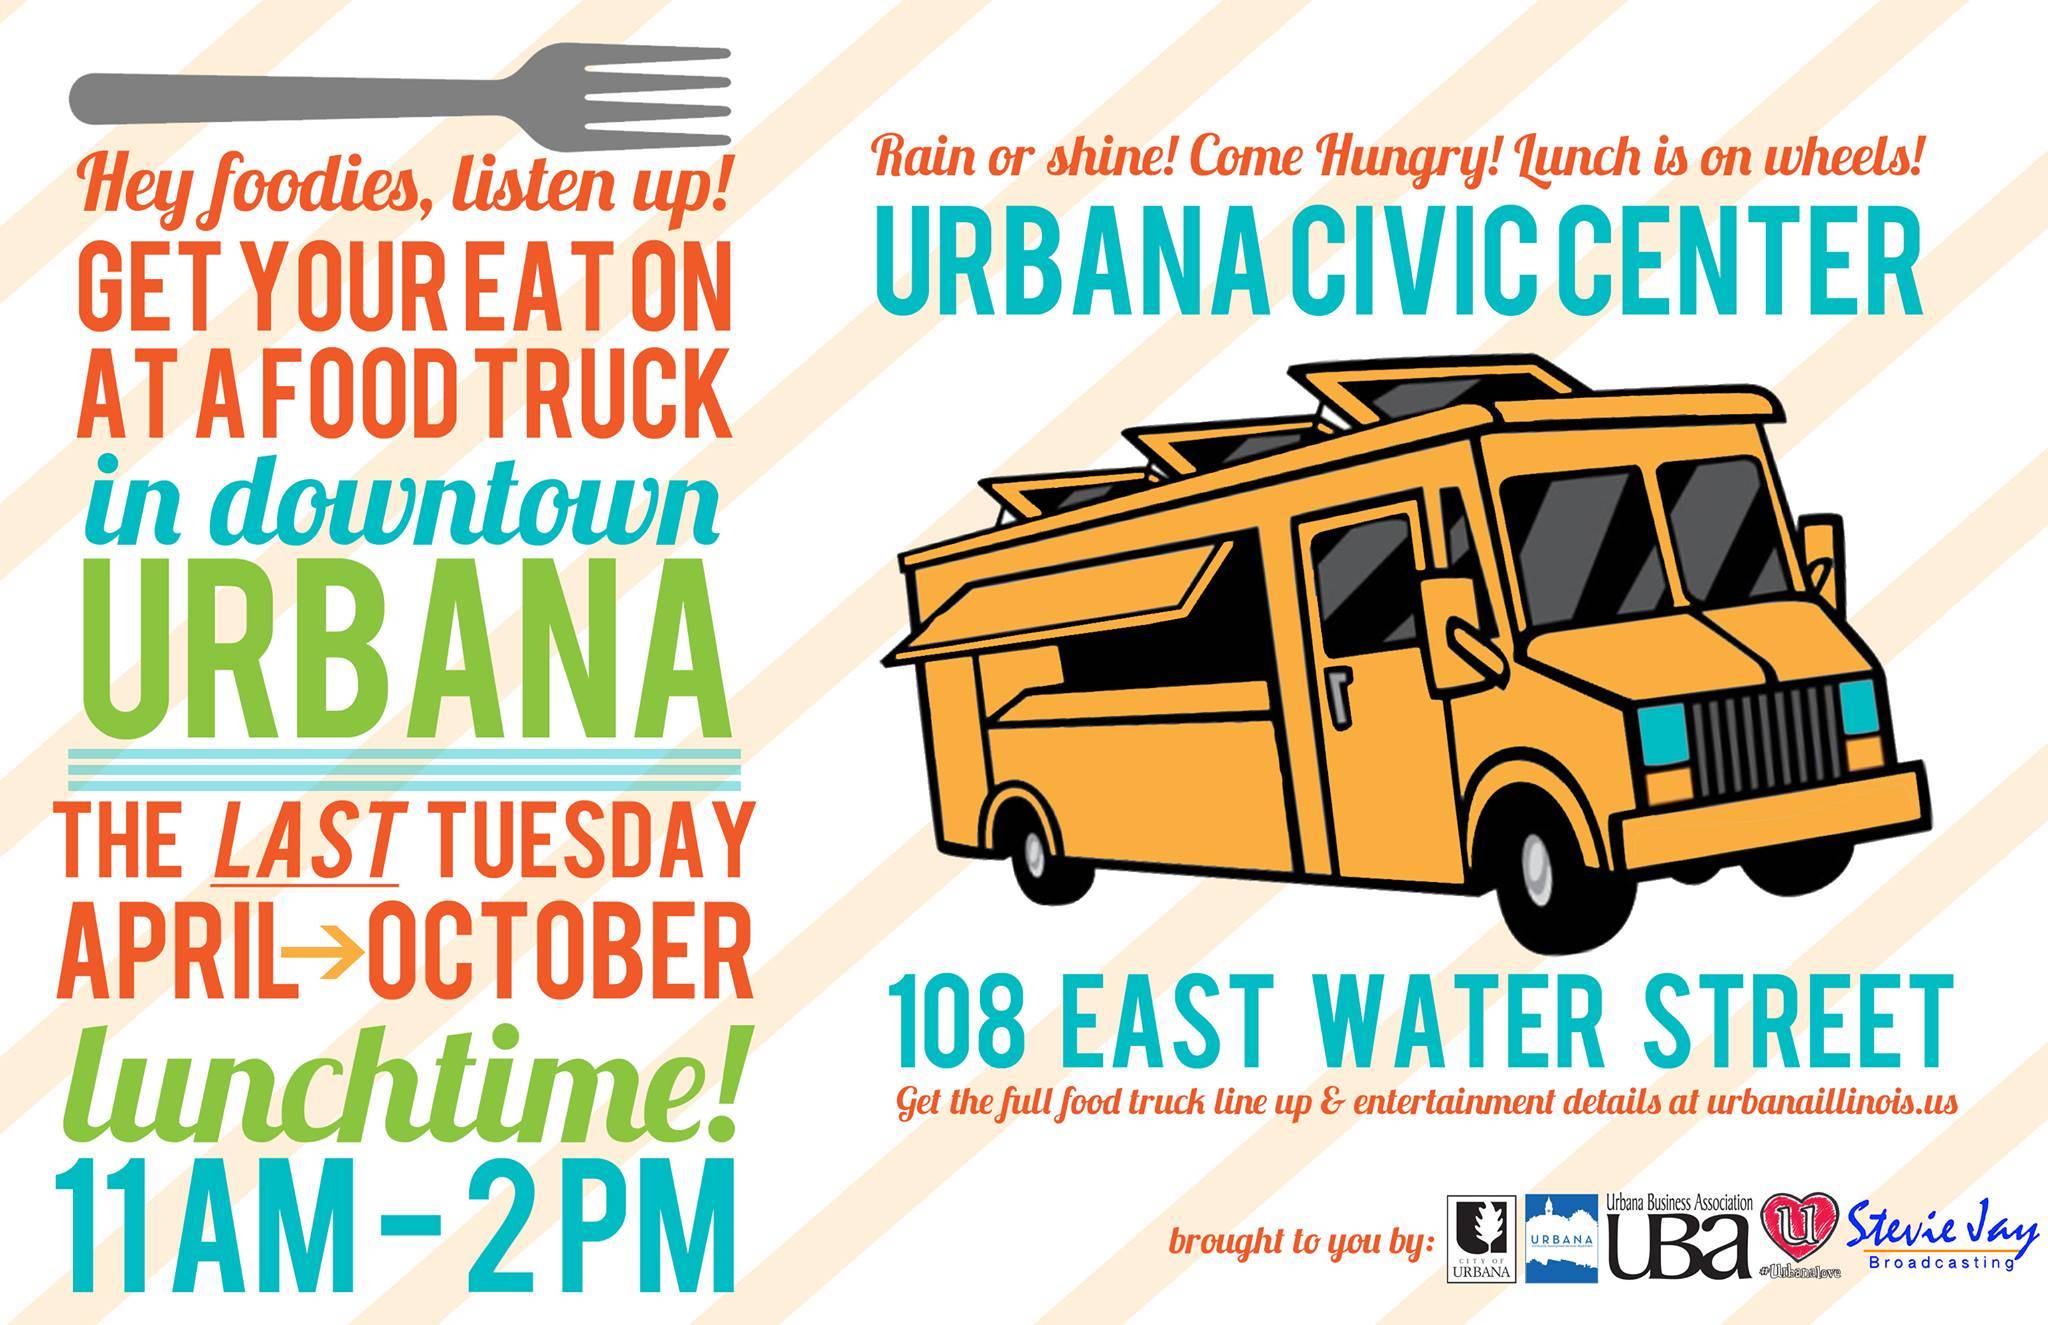 City of Urbana announces 2016 Lunchtime Food Truck Rally Series